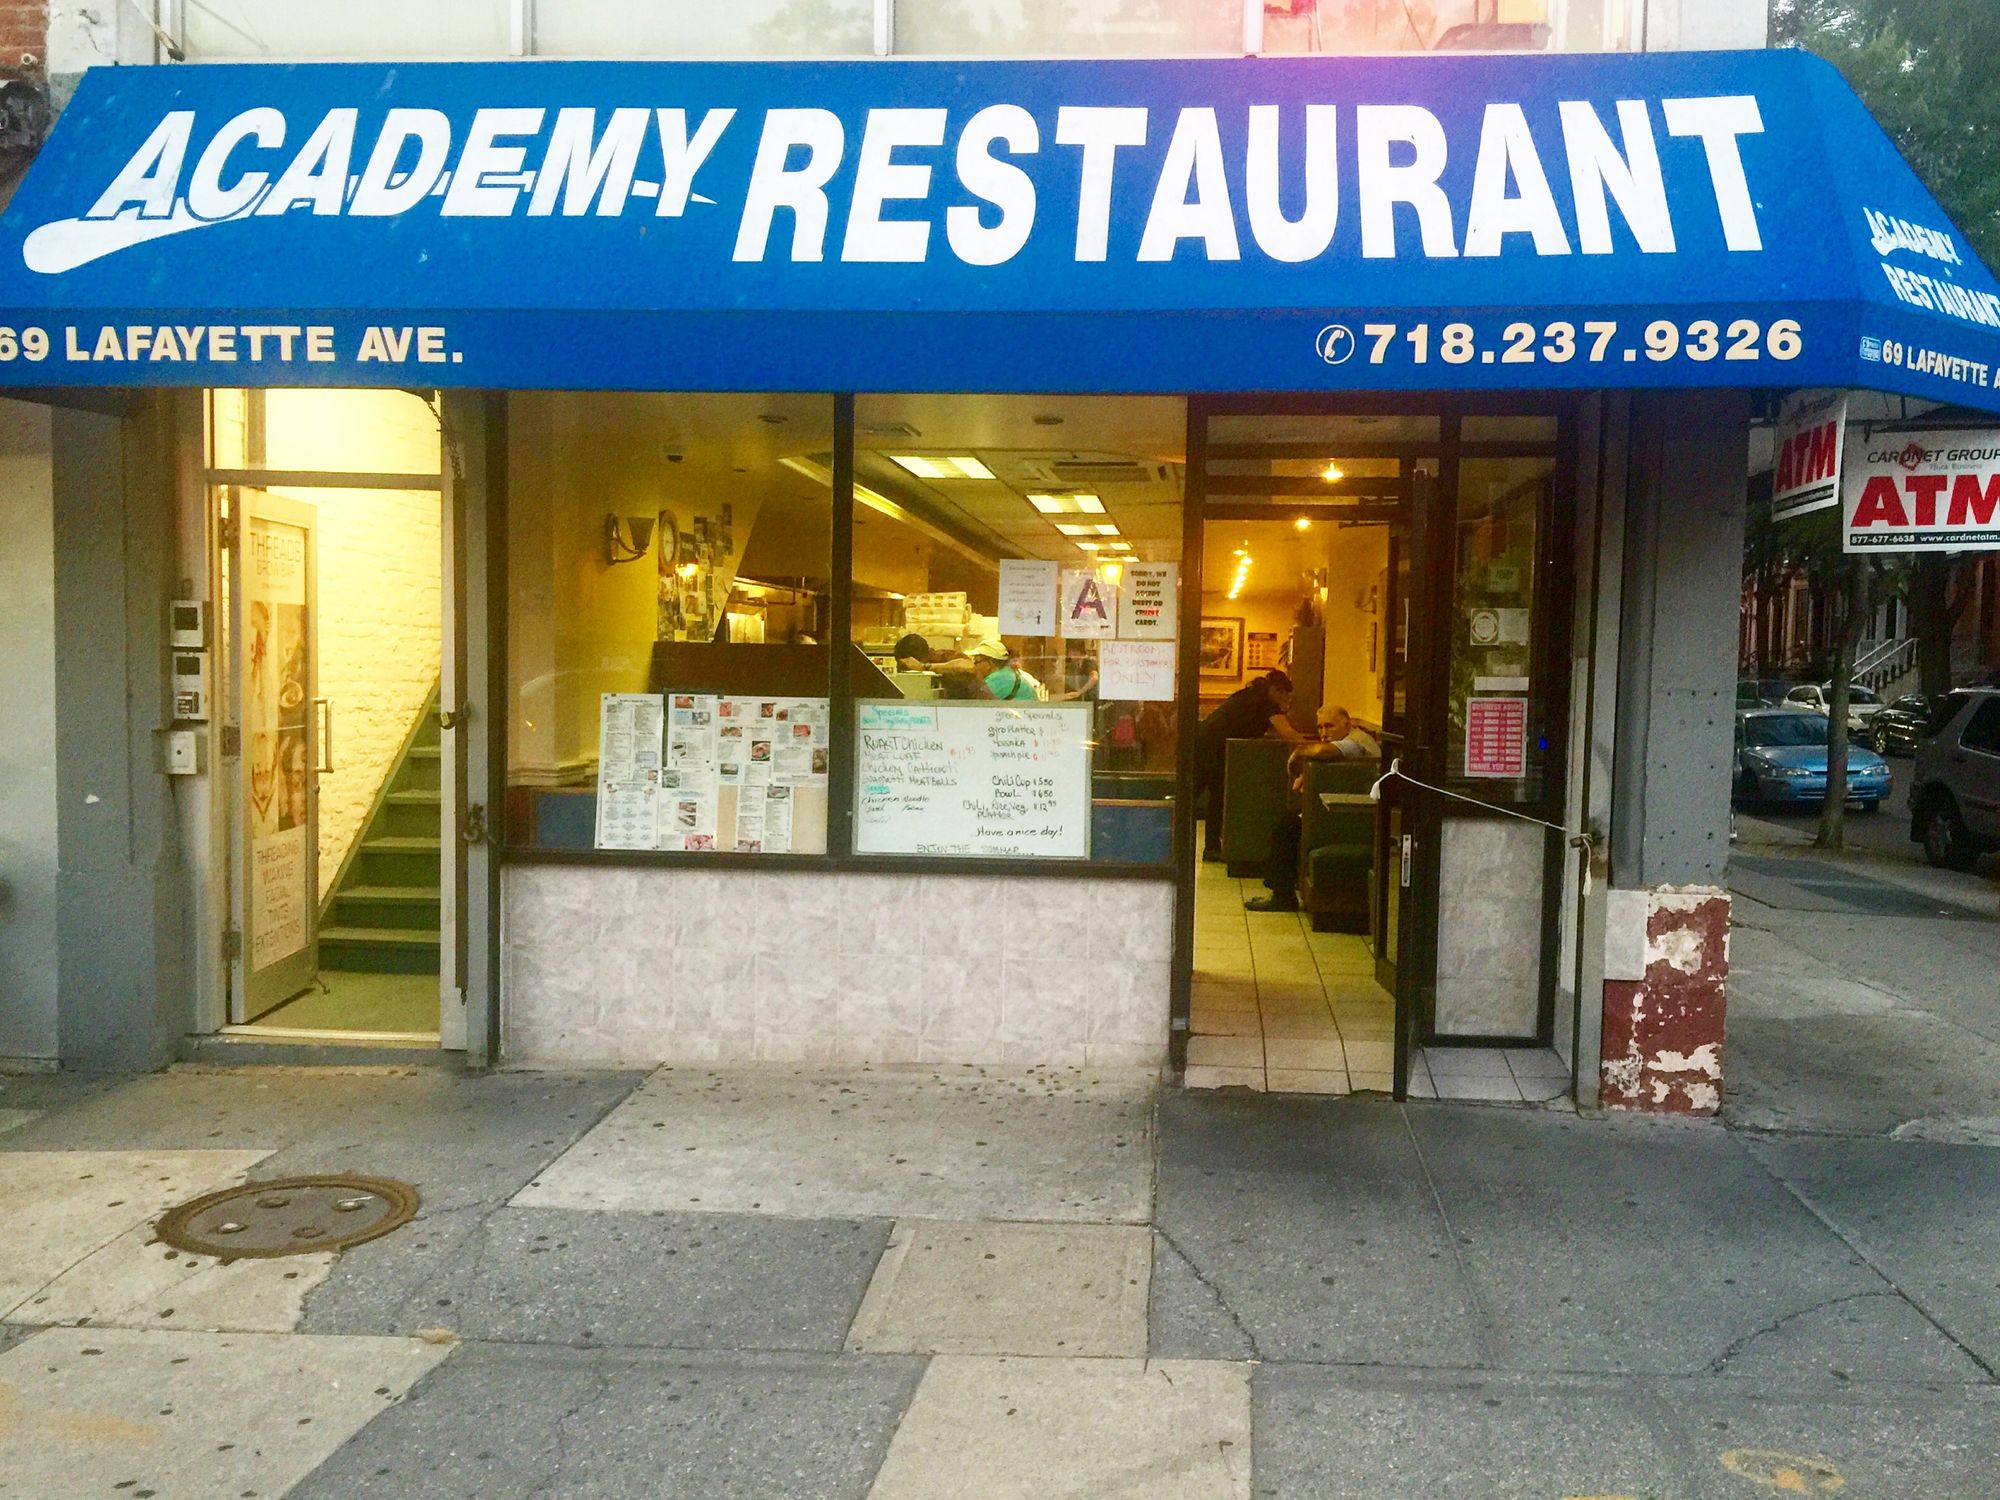 An Ode To The Academy Restaurant